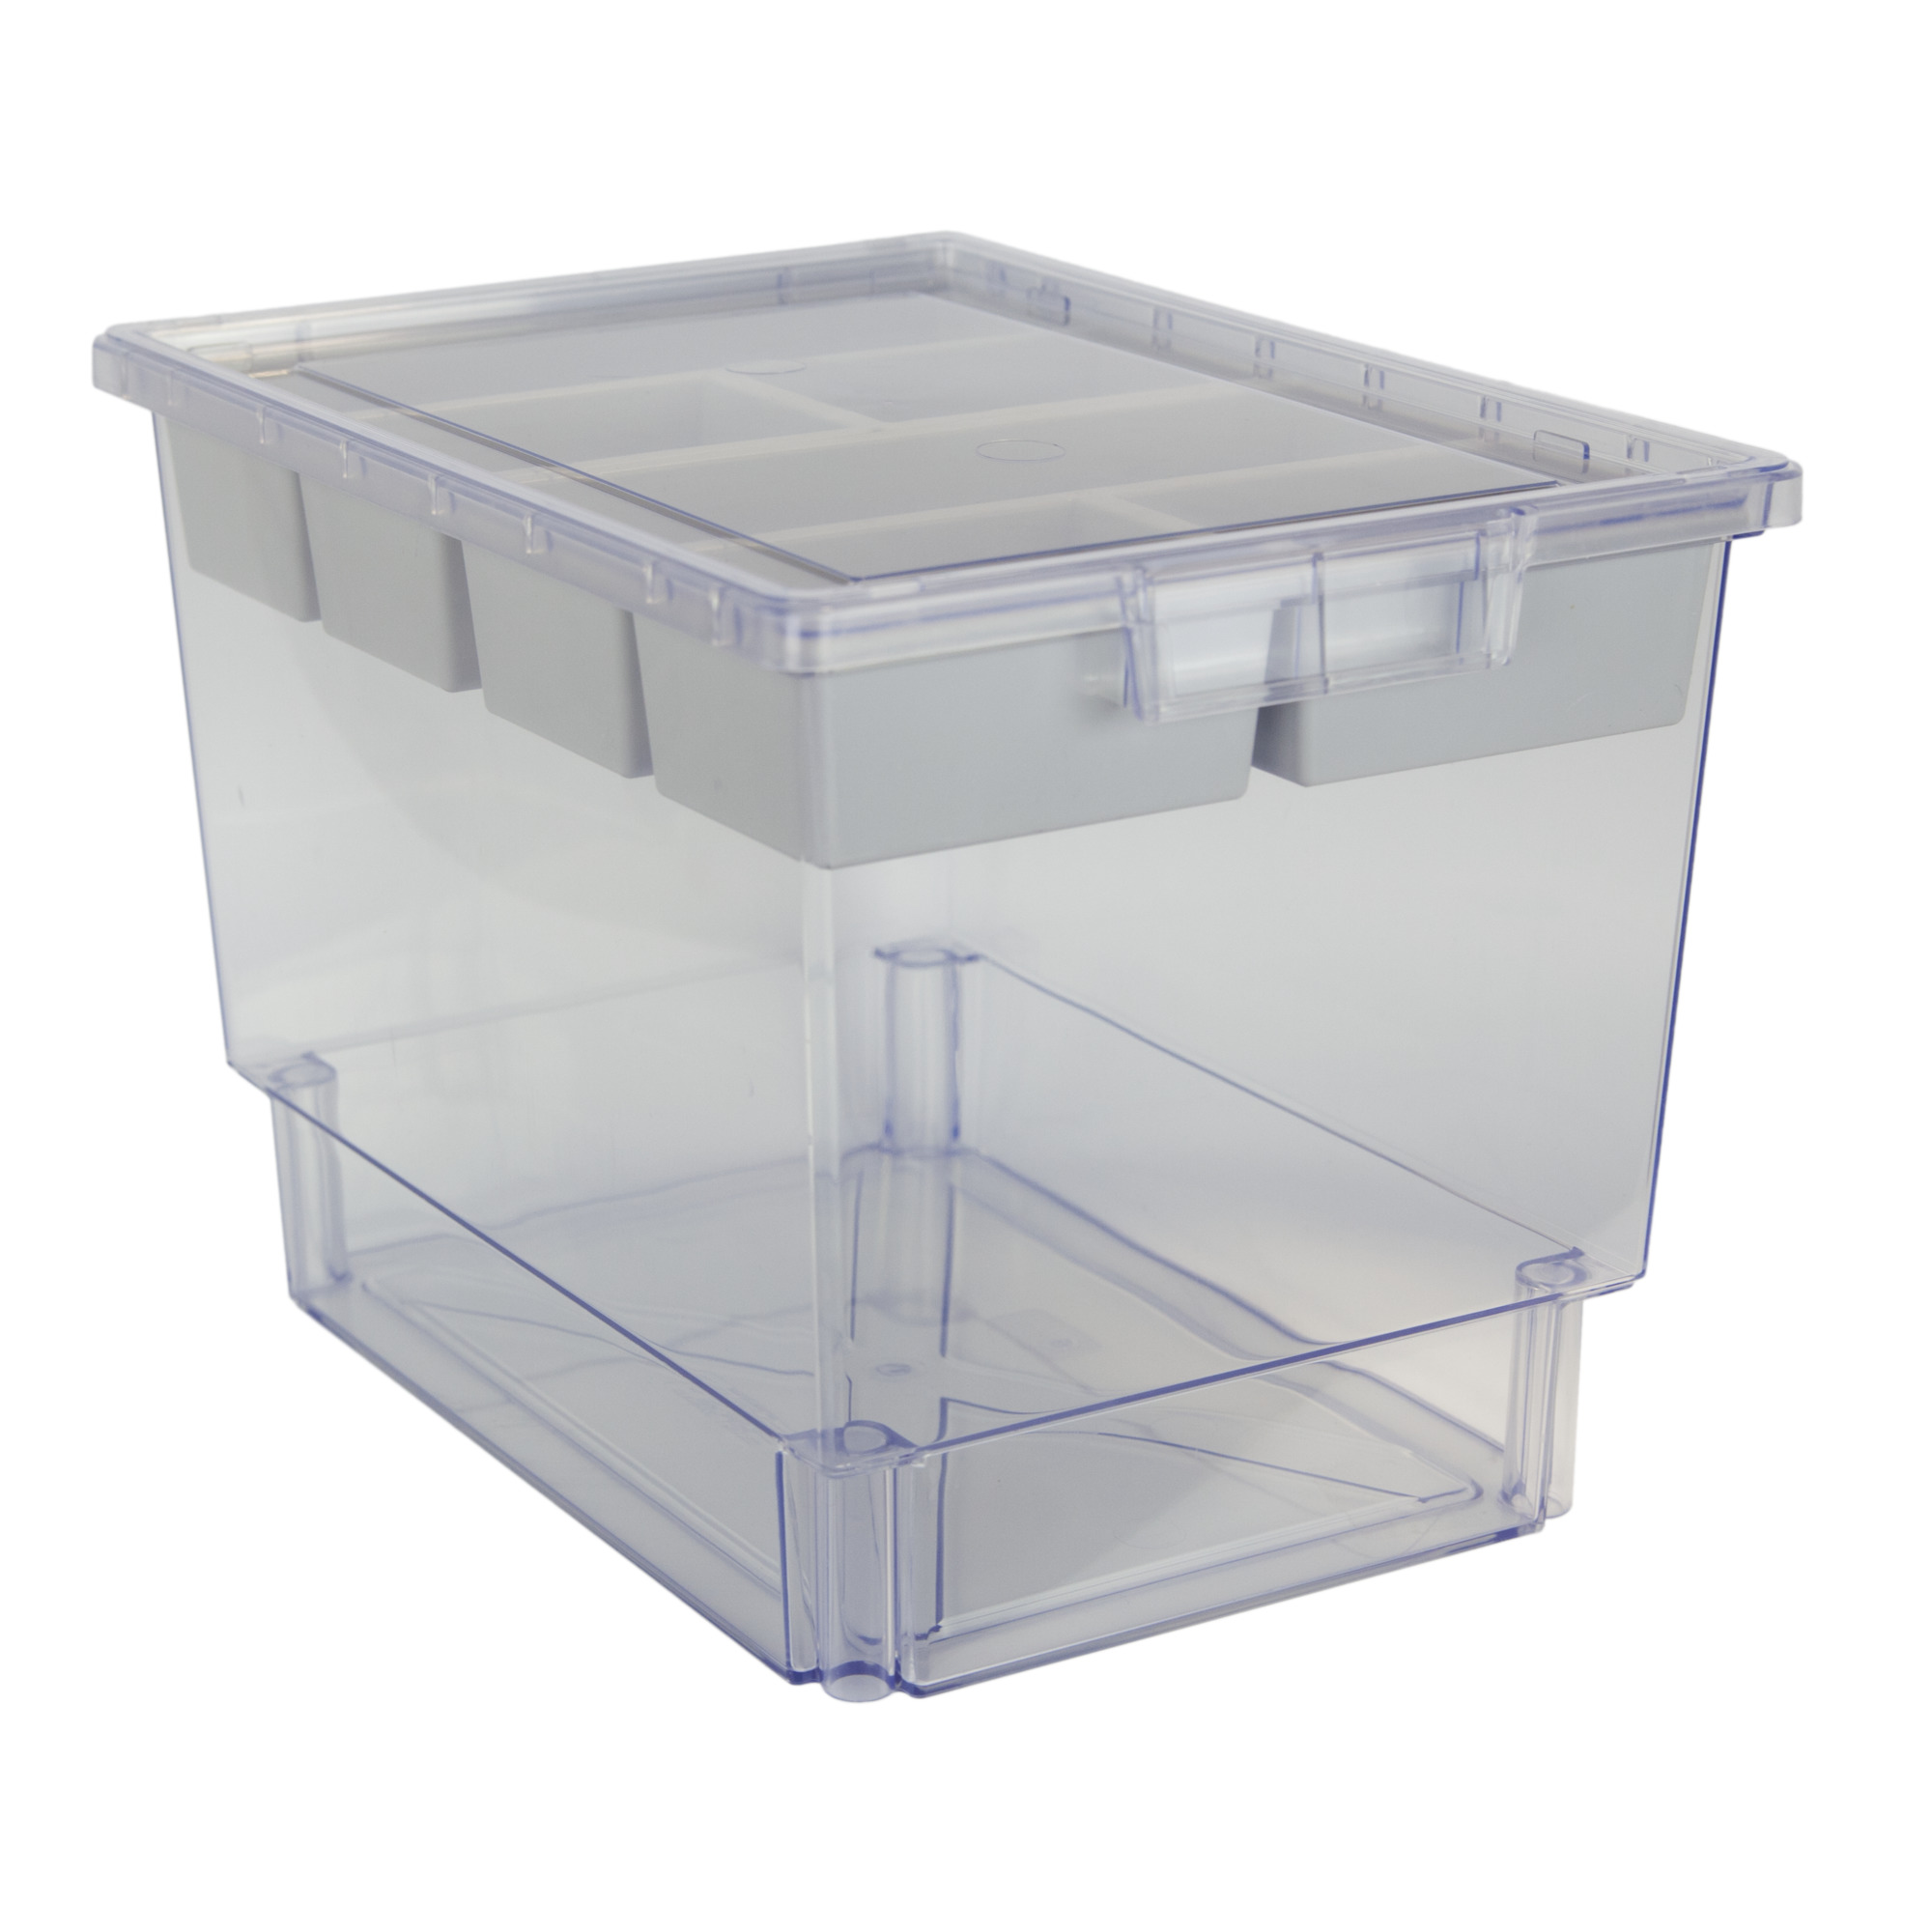 Certwood StorWerks, Slim Line 12Inch Tray Kit (3 x Divisions) Clear-3PK, Included (qty.) 3, Material Plastic, Height 9 in, Model CE1954CL-NK0004-3